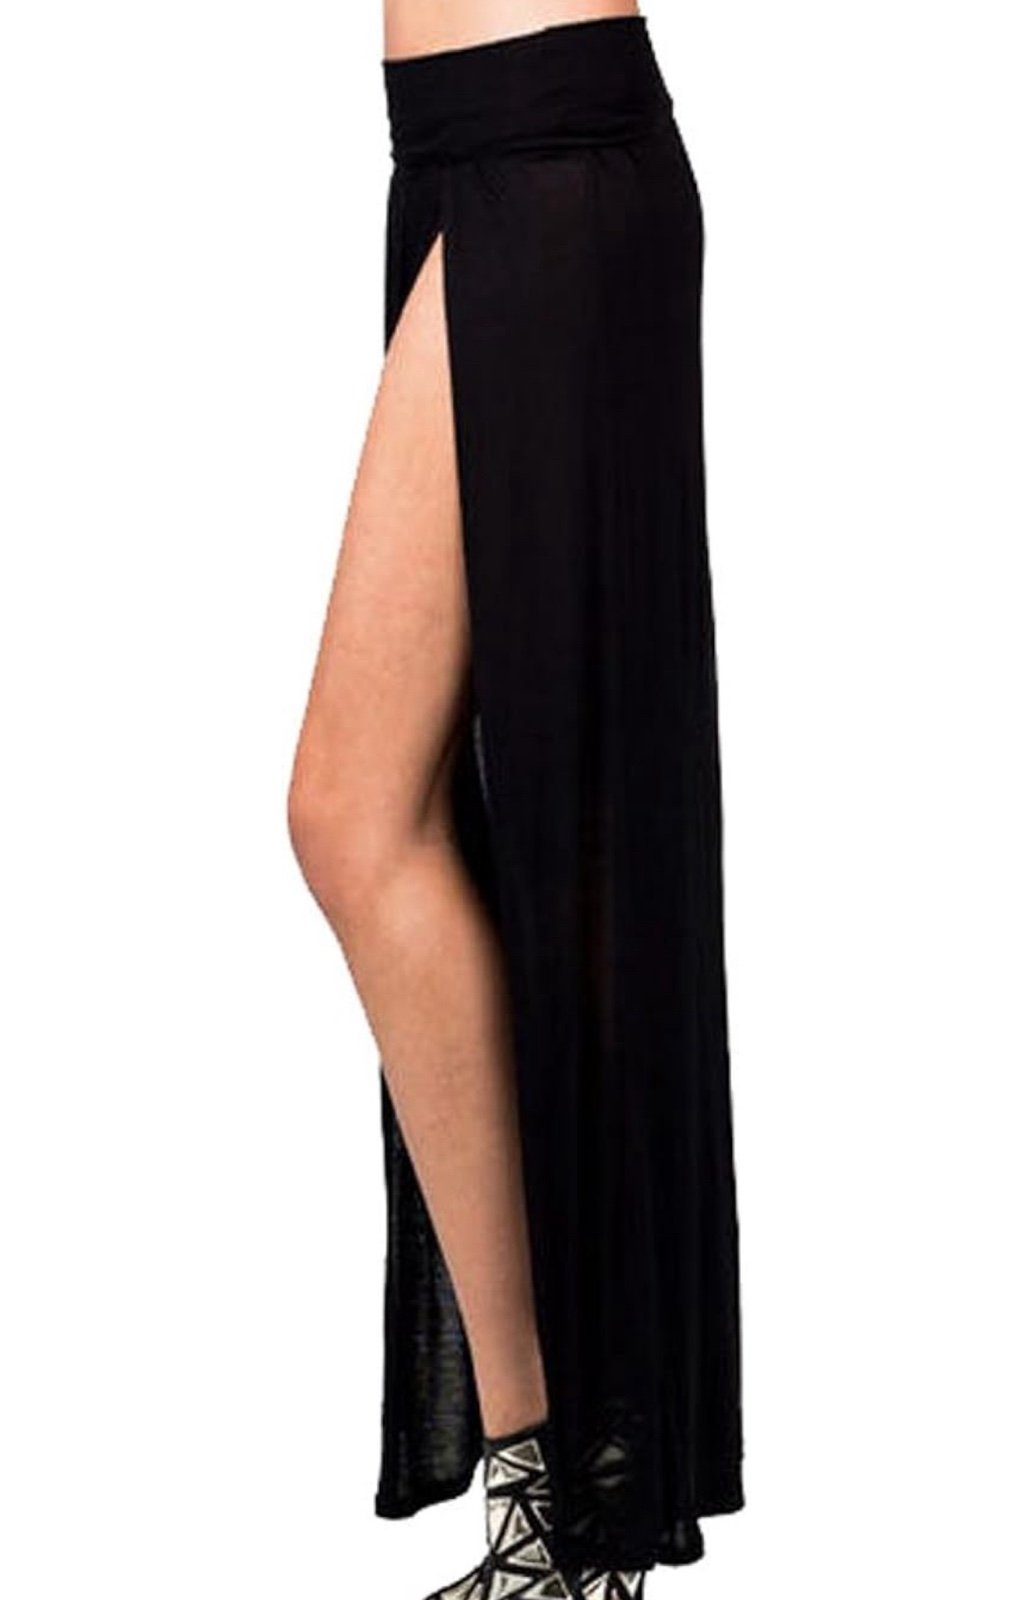 Black gothic sexy high waisted double slits open maxi skirt gfIqOL5Xh